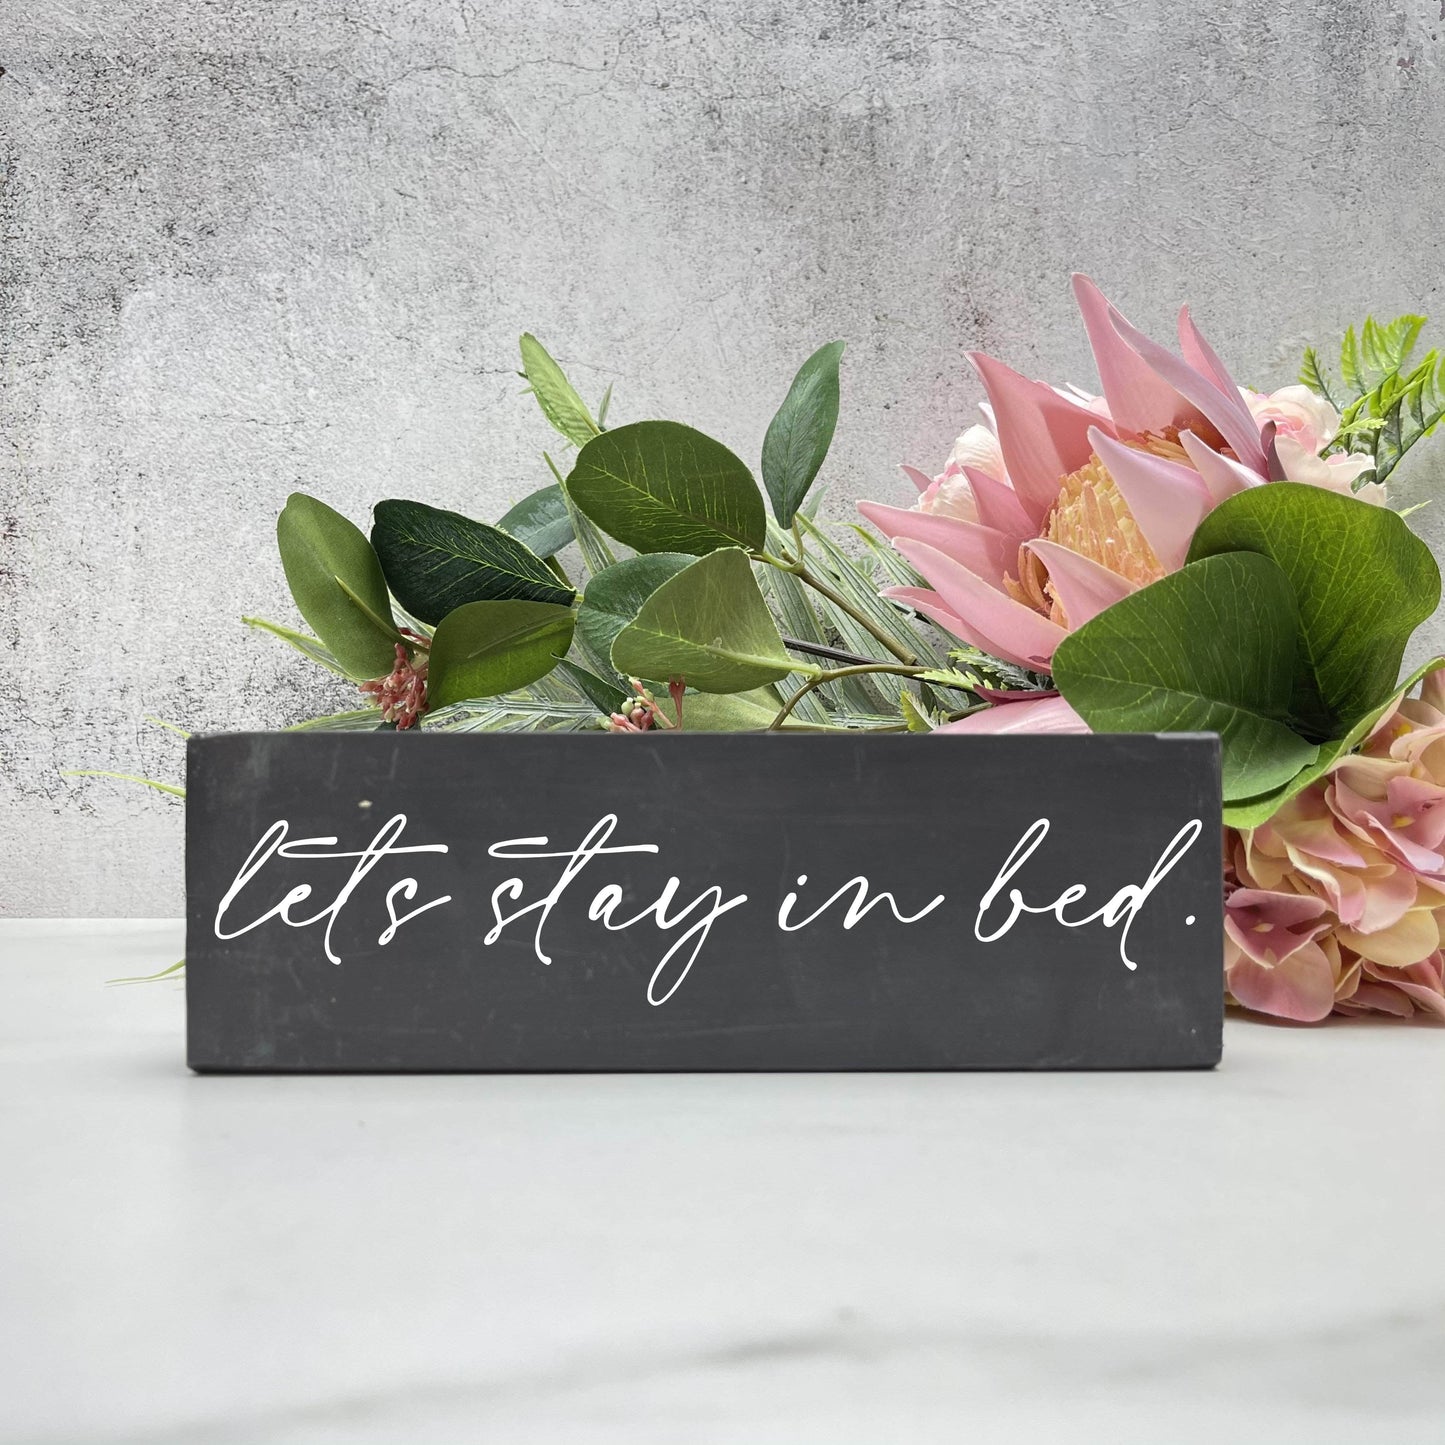 Let's stay in bed wood sign, love sign, couples gift sign, quote sign, home decors